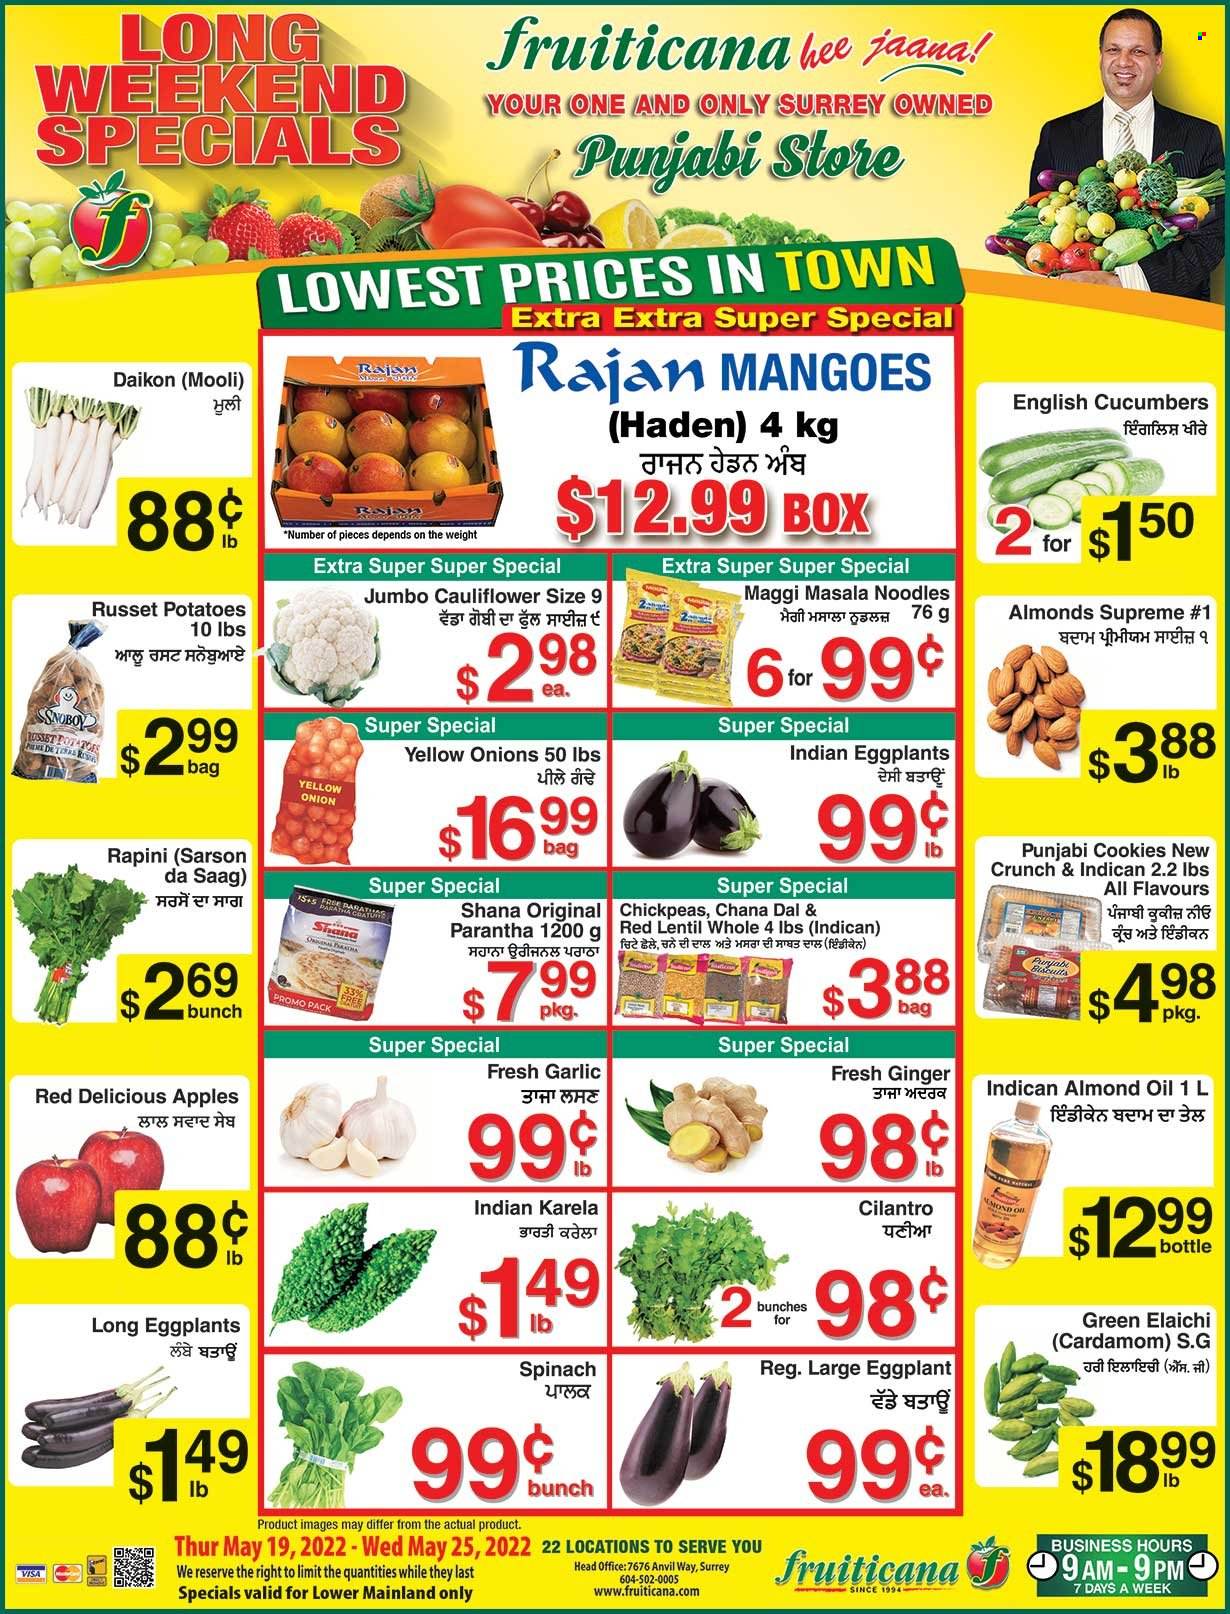 thumbnail - Fruiticana Flyer - May 19, 2022 - May 25, 2022 - Sales products - cauliflower, cucumber, garlic, ginger, russet potatoes, spinach, potatoes, onion, eggplant, white radish, apples, mango, Red Delicious apples, noodles, cookies, Maggi, chickpeas, chana dal, cilantro, almond oil, oil, almonds. Page 1.